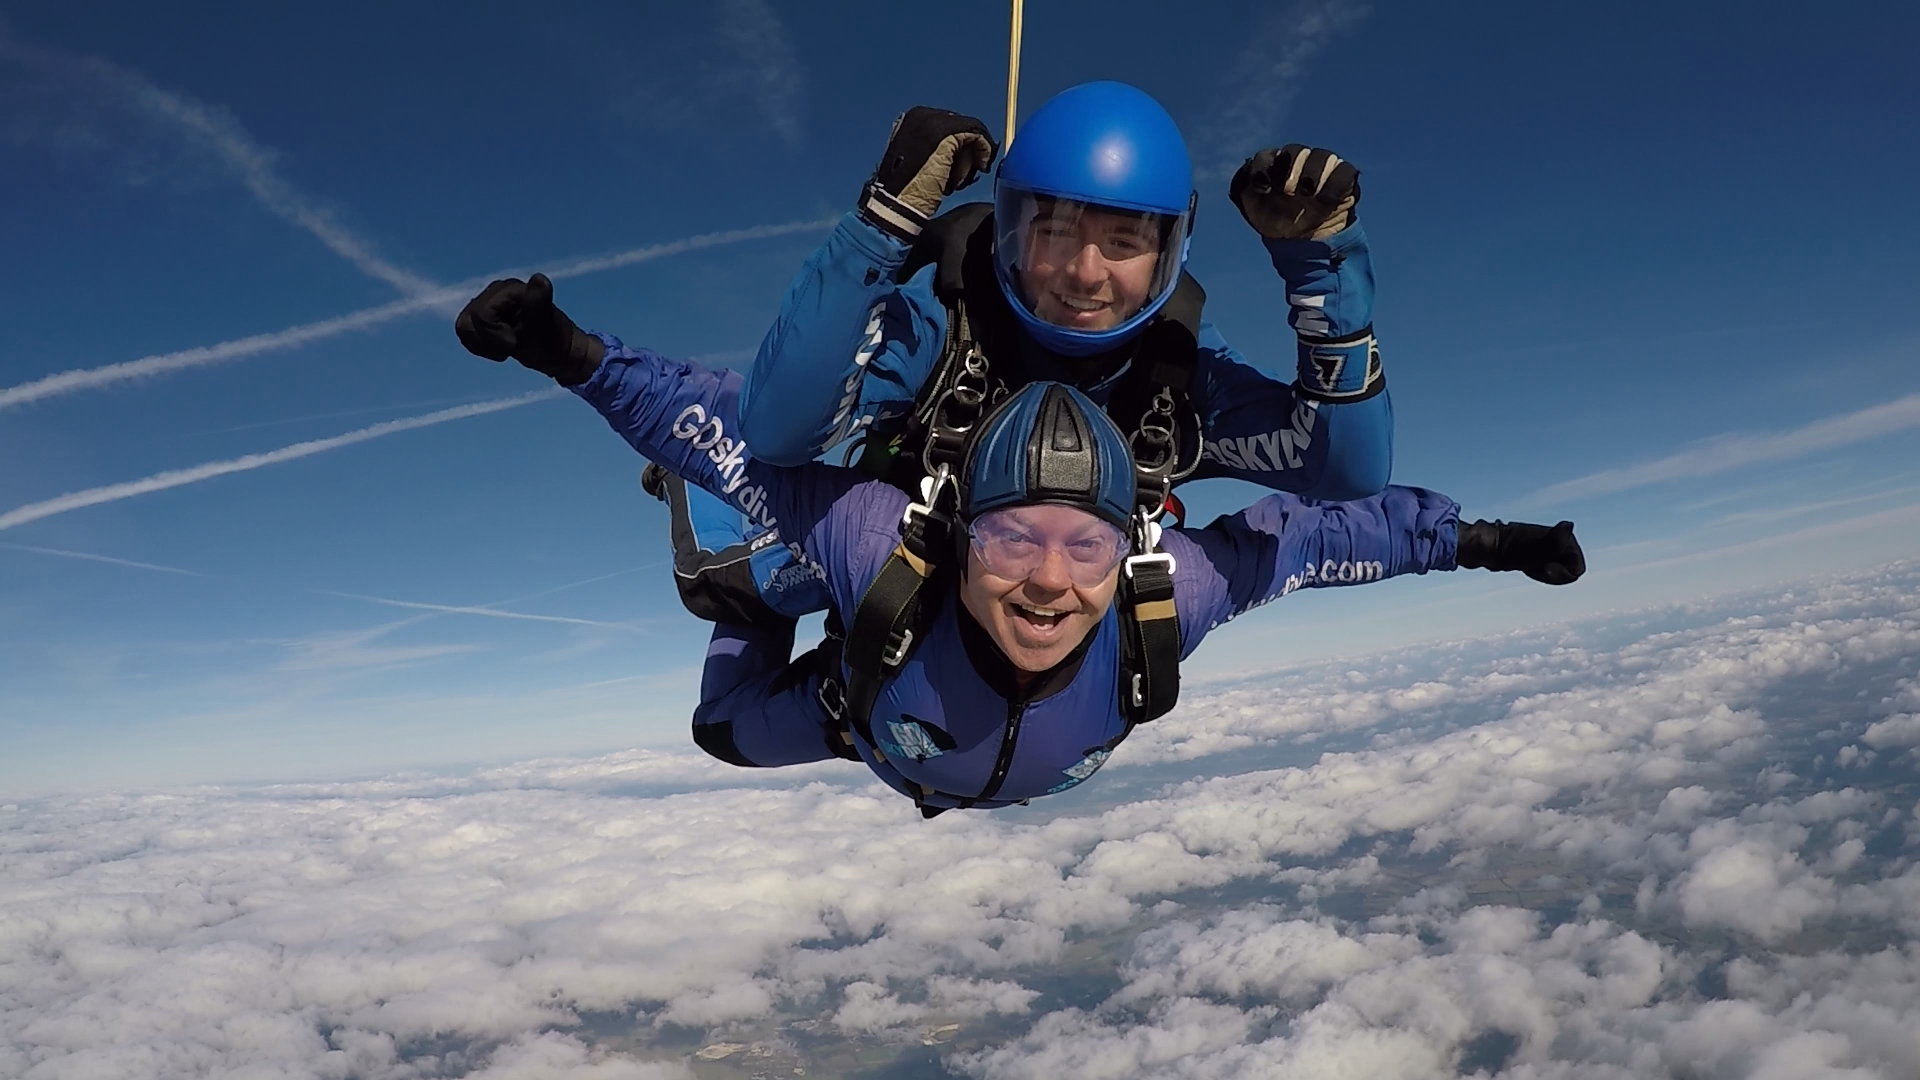 View All Selfies - Tandem Skydiving , HD Wallpaper & Backgrounds